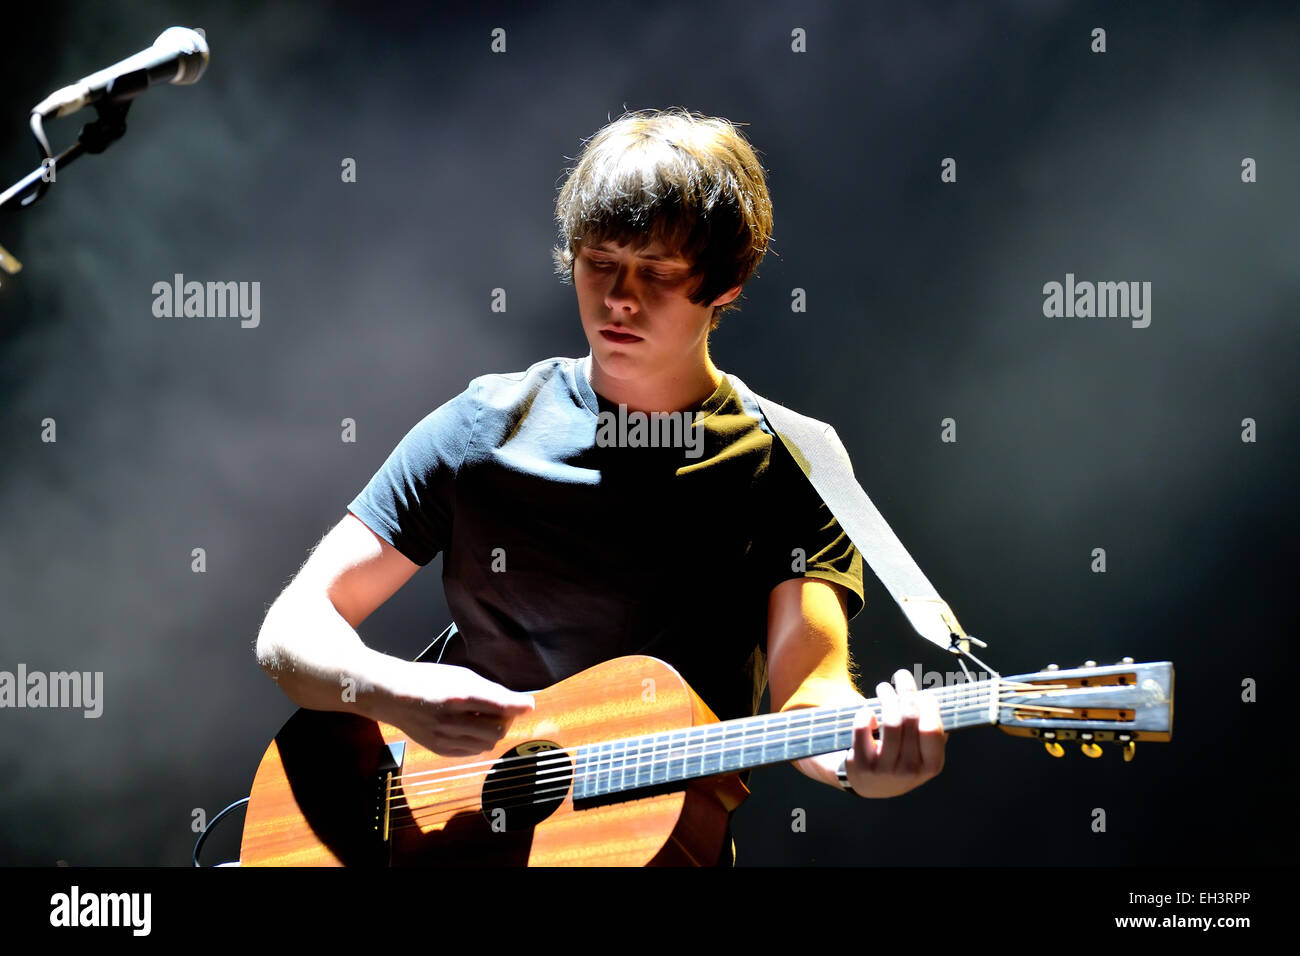 MADRID - SEP 13: Jake Bugg (English Musician, singer and songwriter) concert at Dcode Festival. Stock Photo